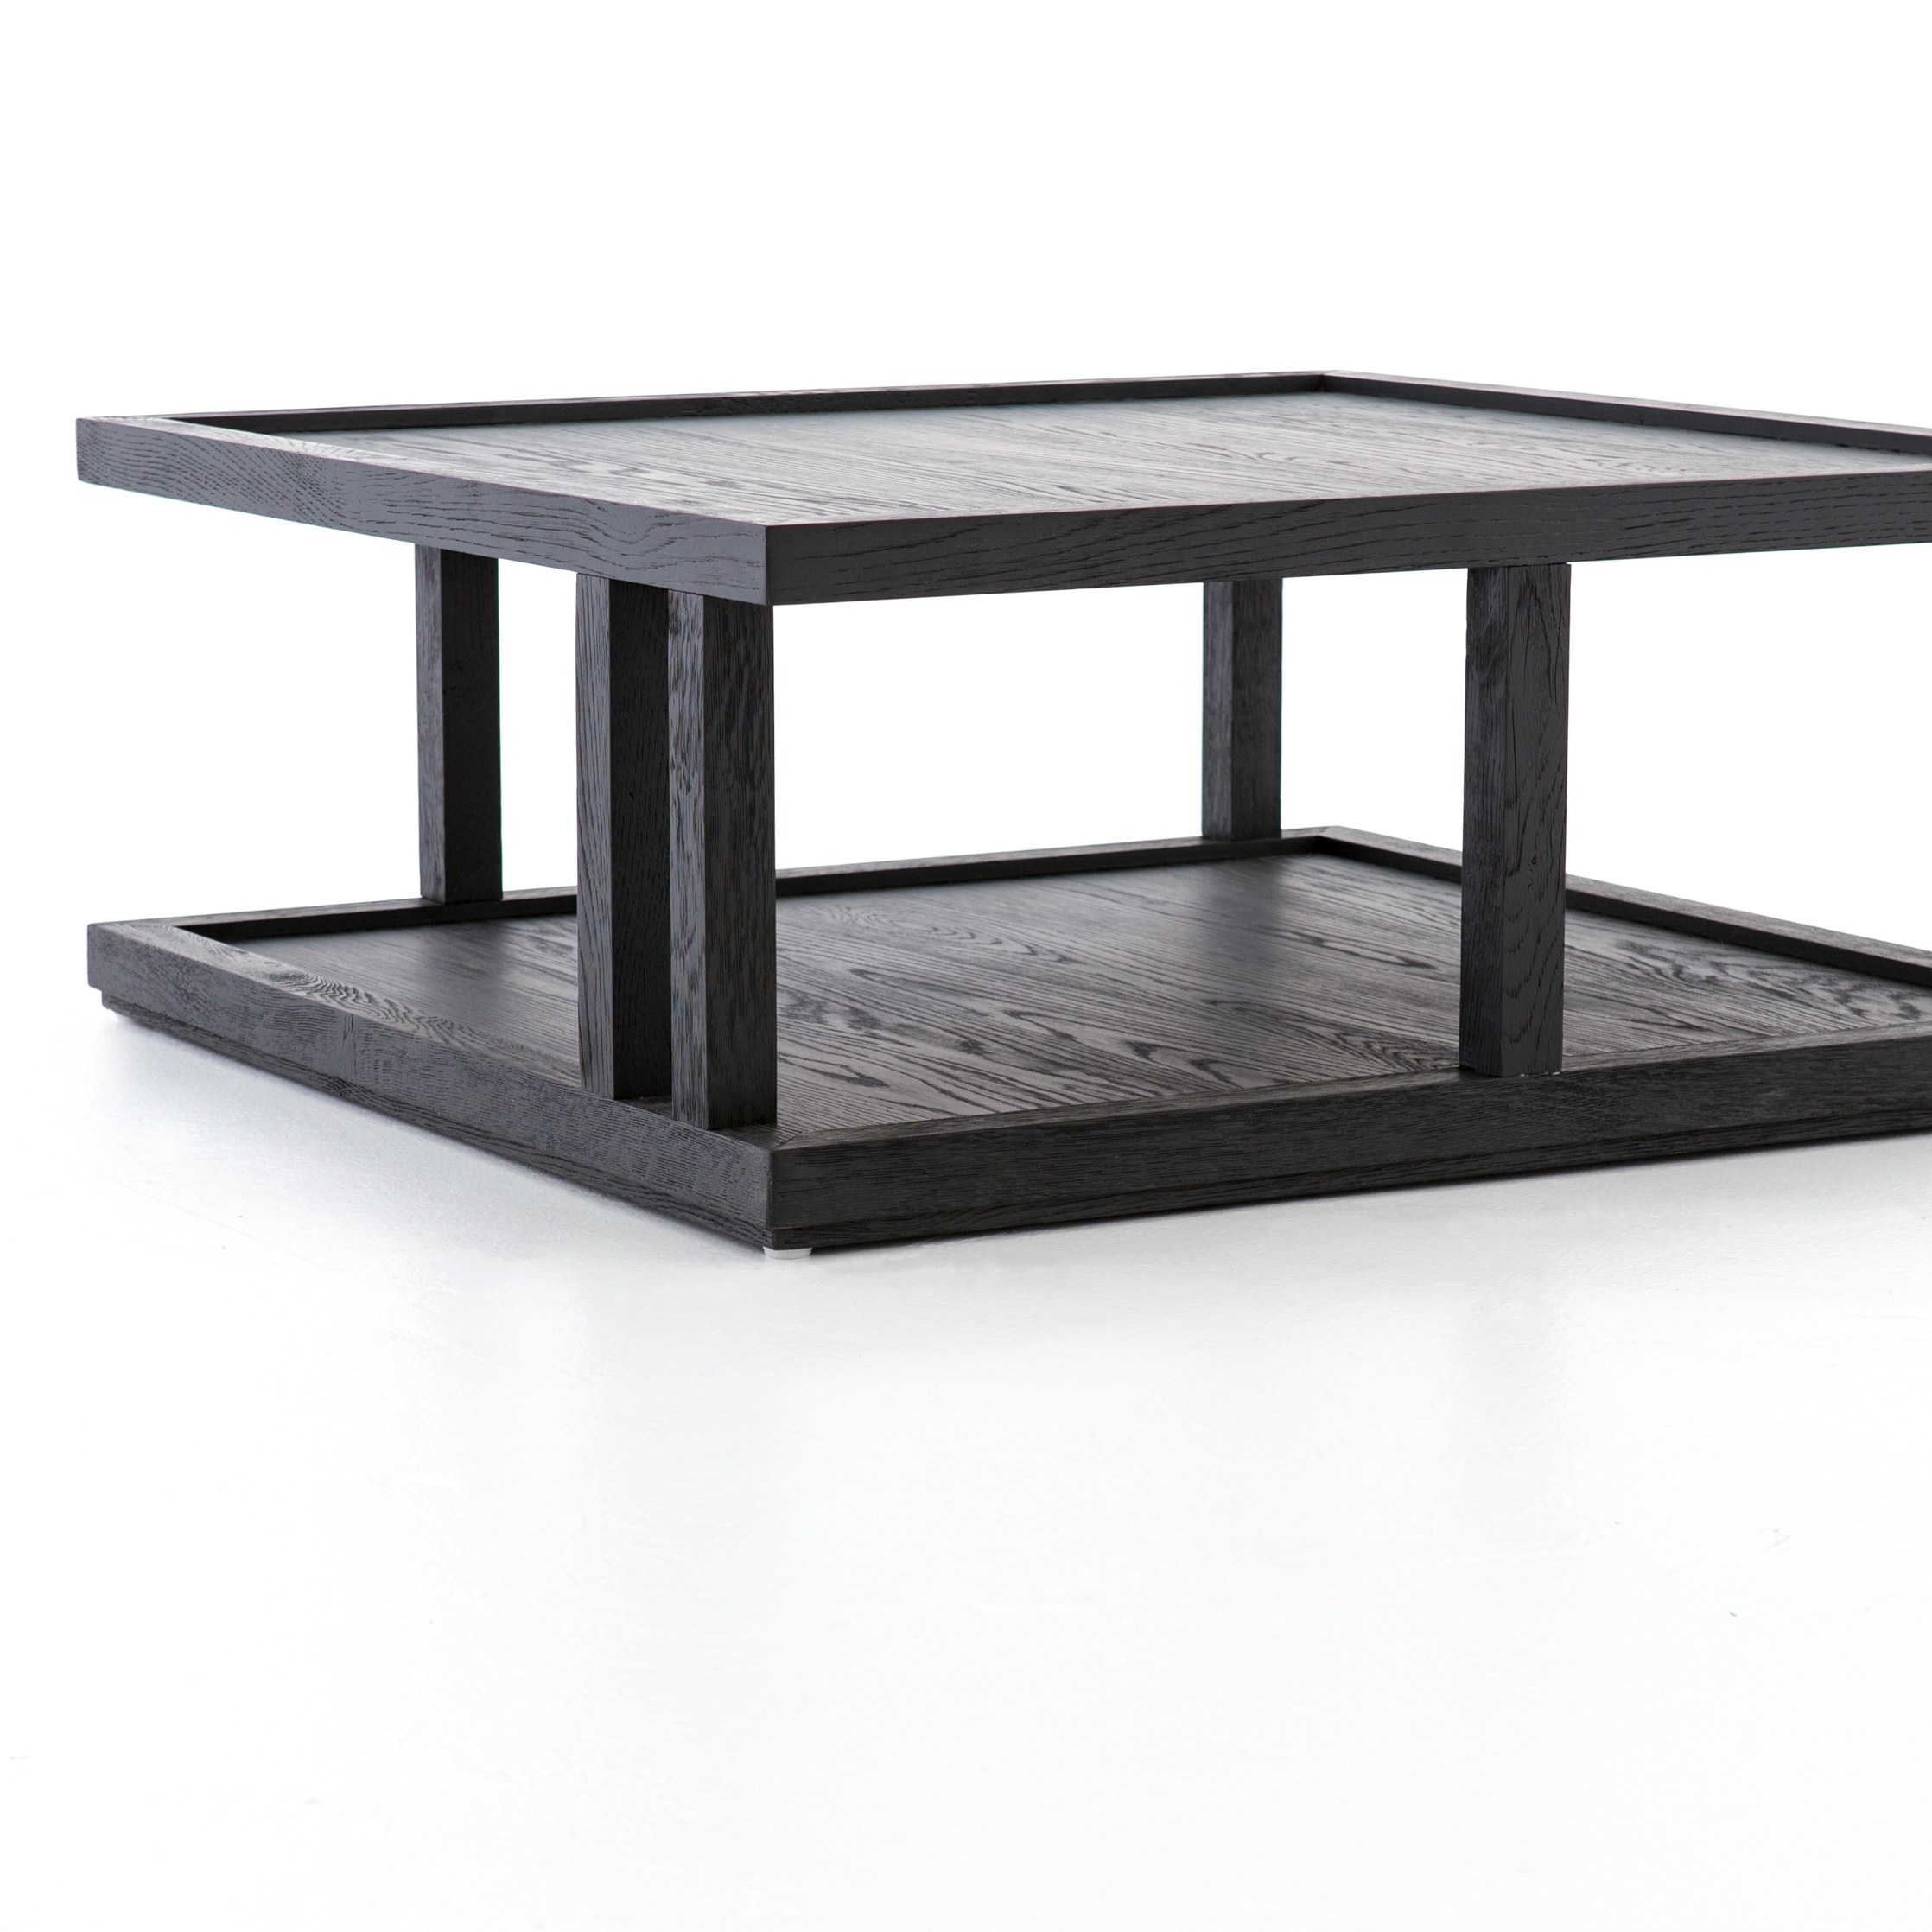 Charley Coffee Table-Drifted Black - Image 3